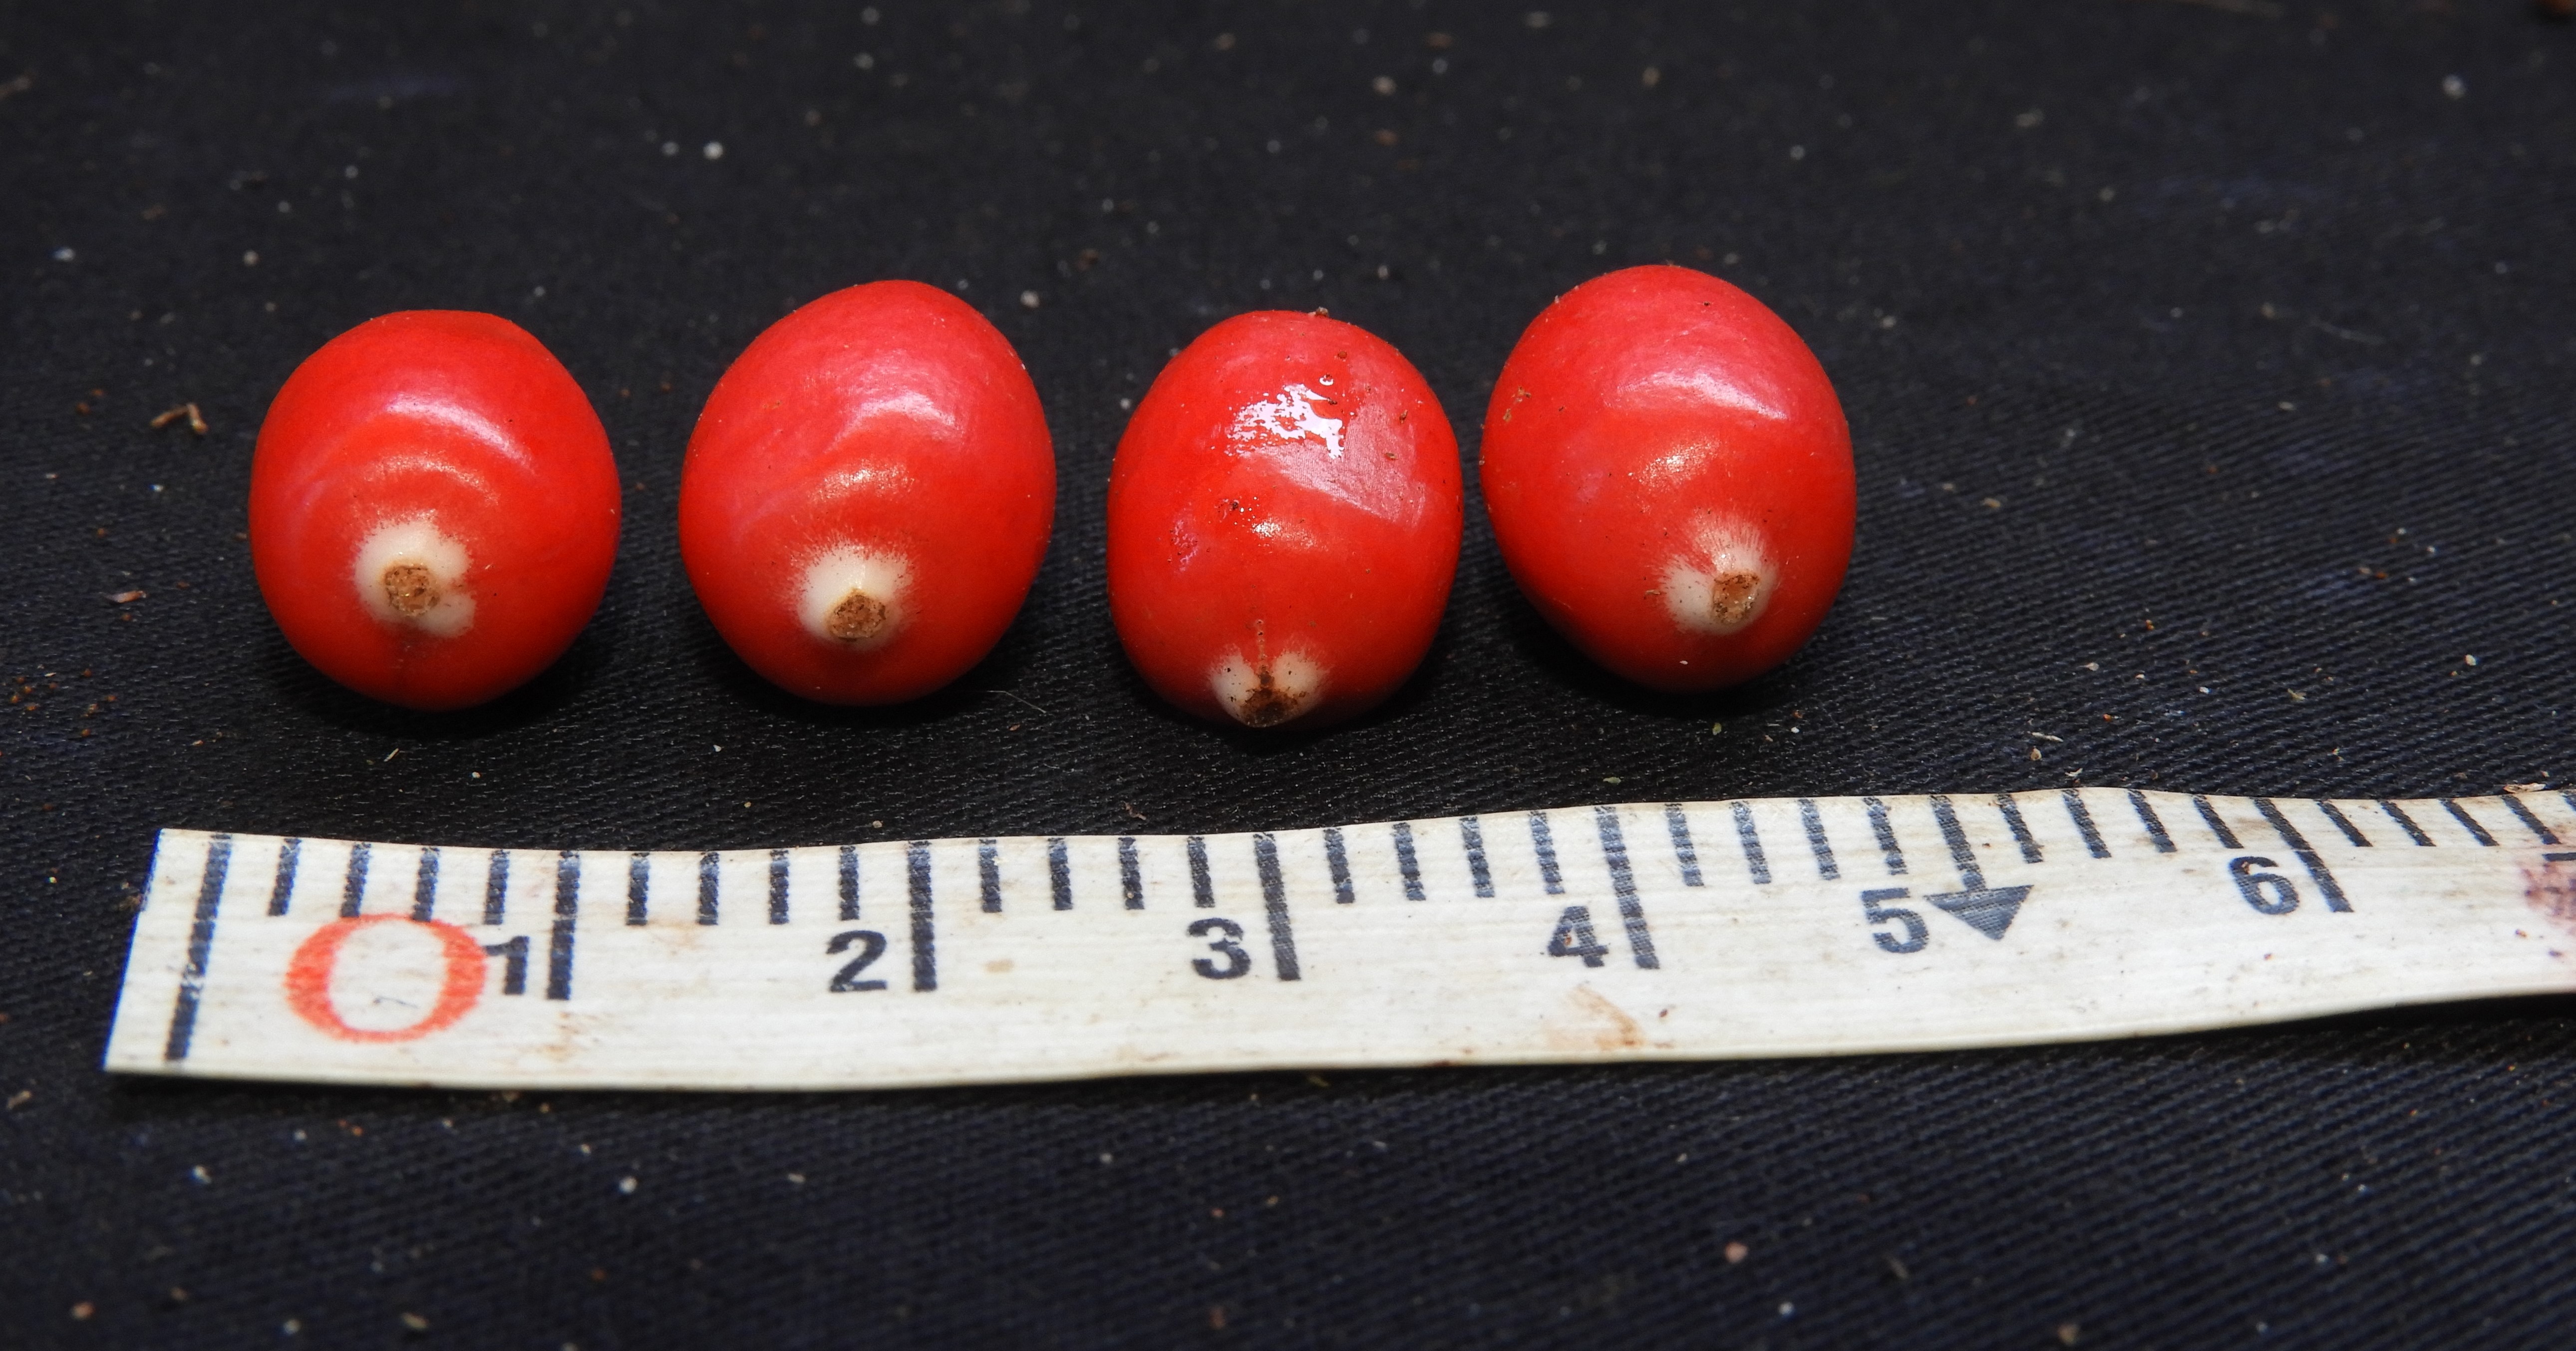 Red fruits about a centimetre in size are lined up for examination